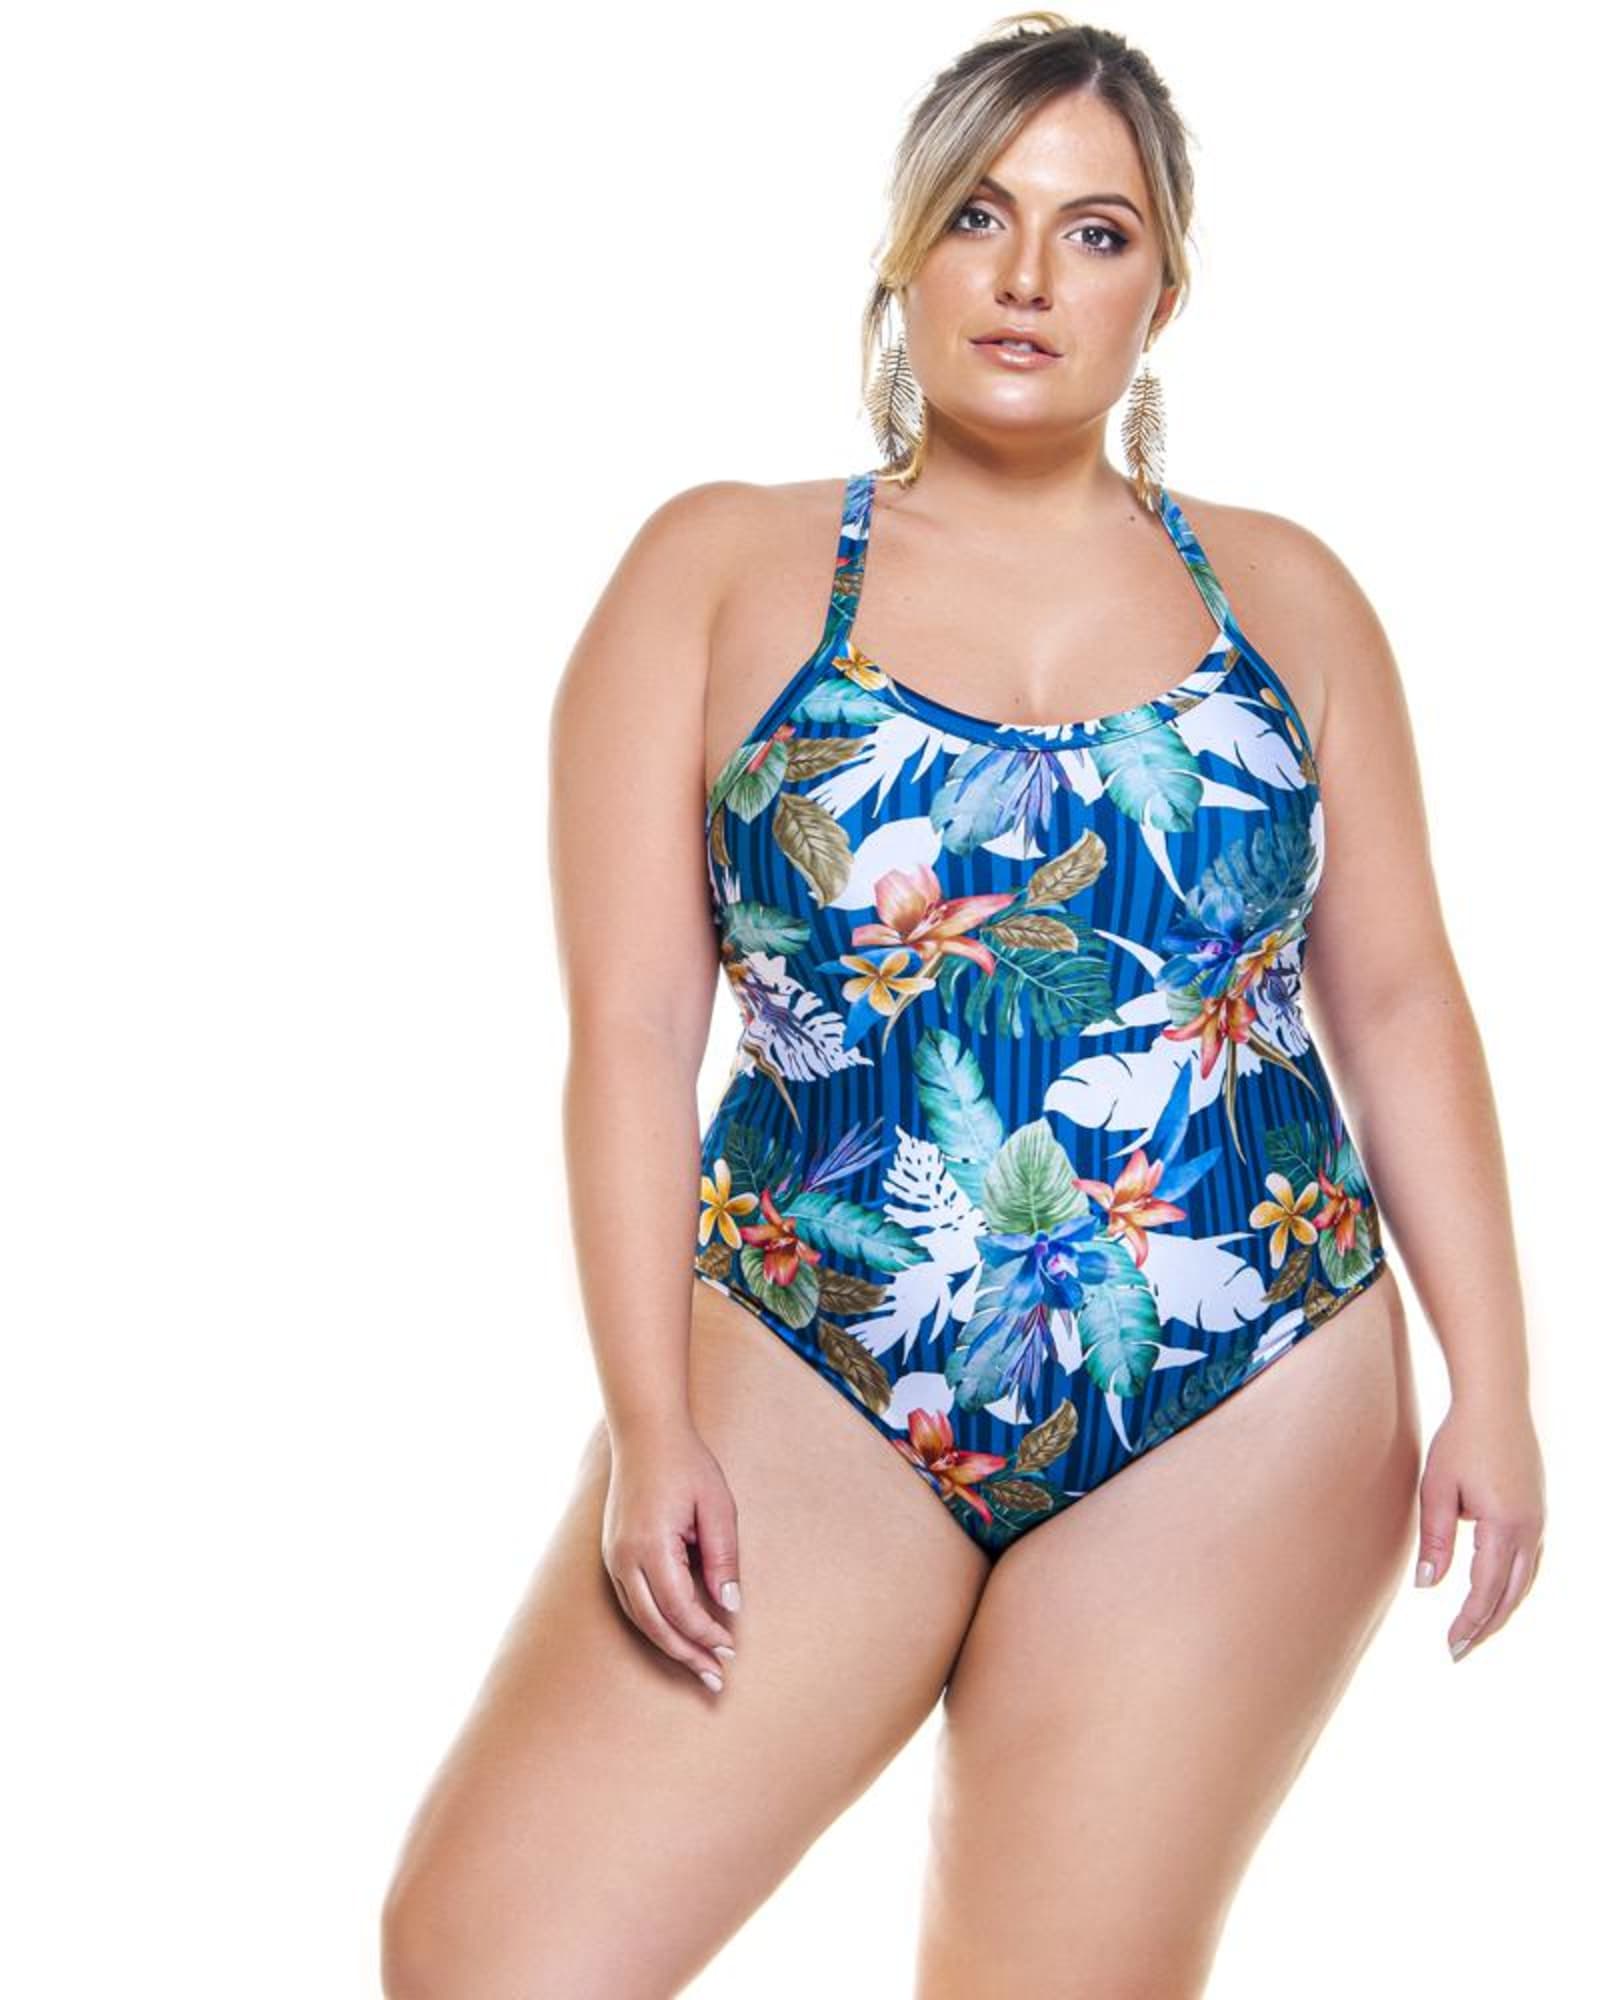 Padded Swimsuit And Crossed Back | Fiori